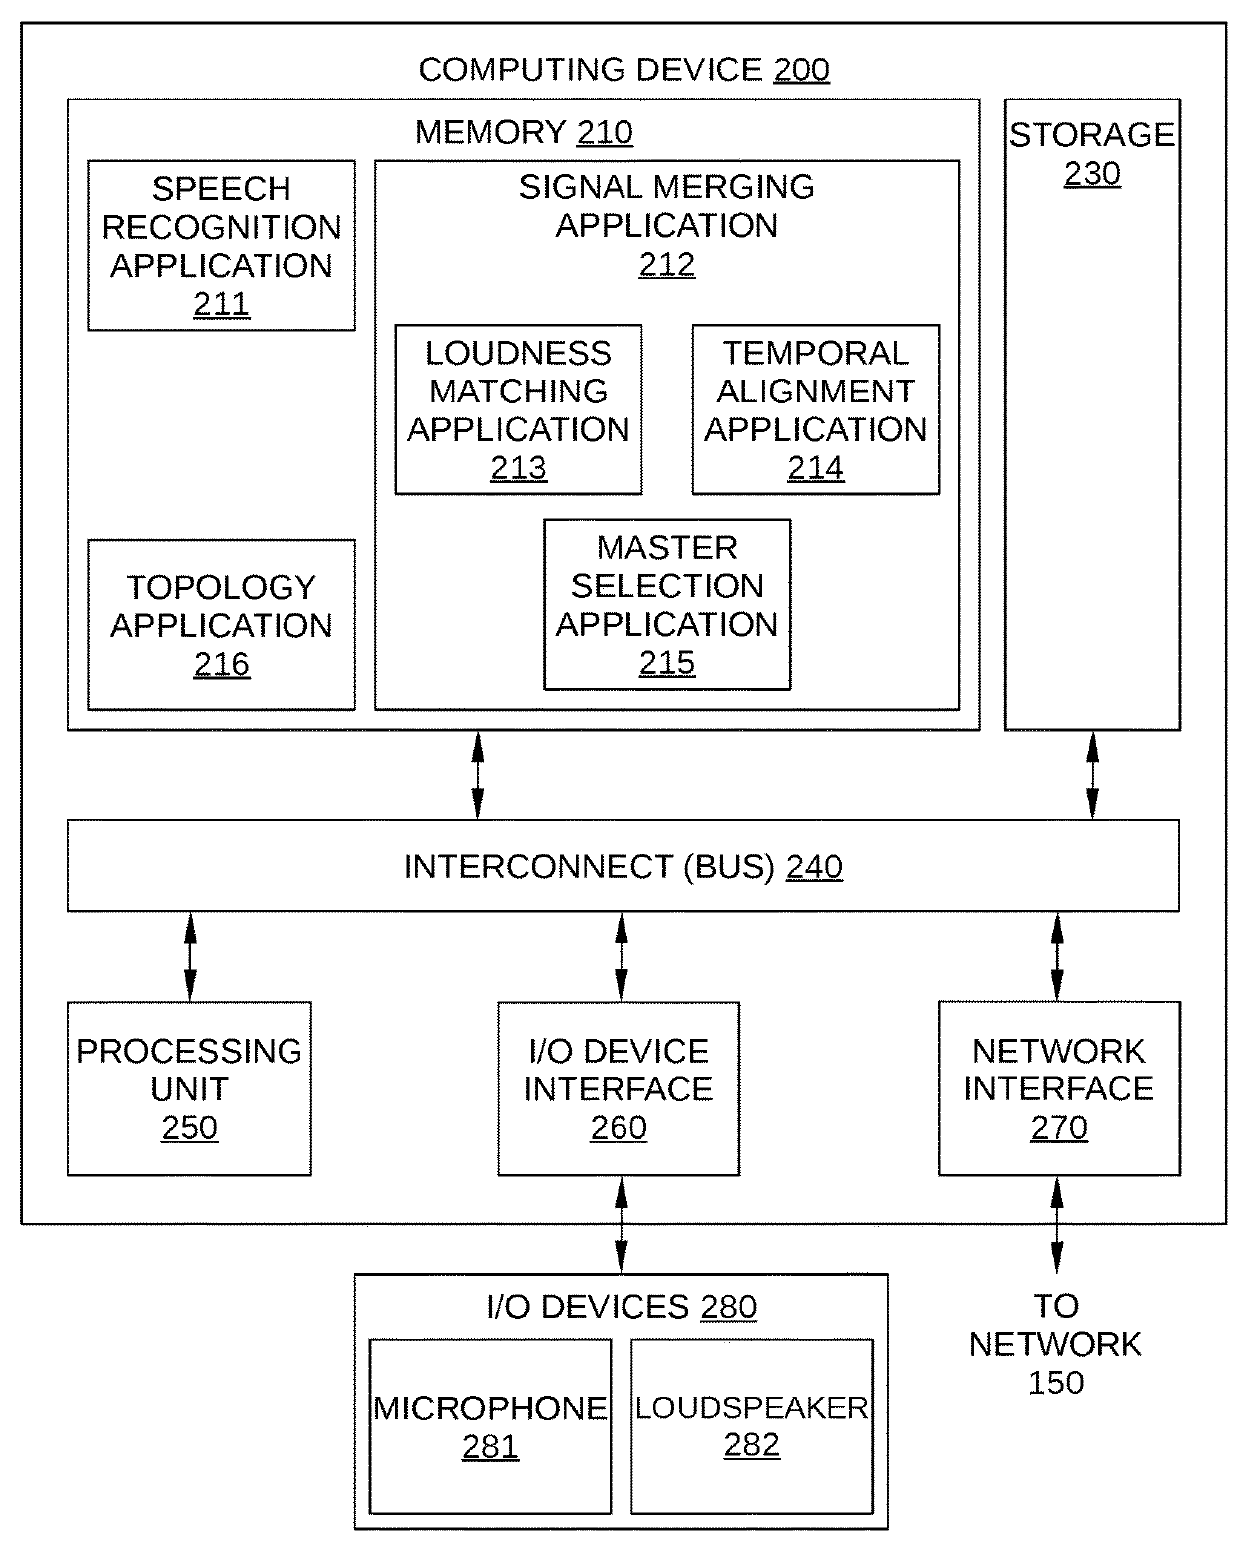 Execution of voice commands in a multi-device system